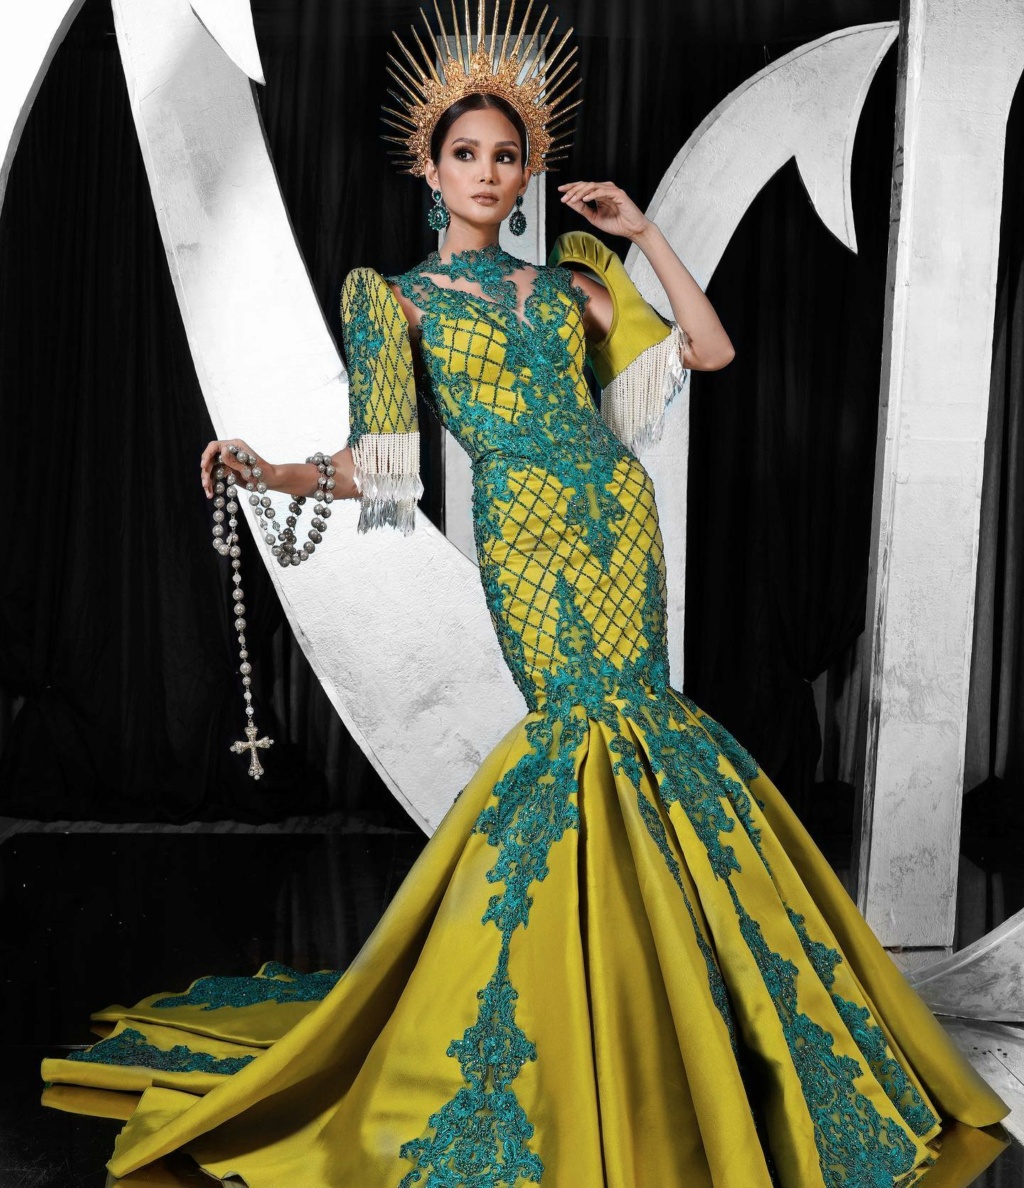 Miss World Philippines 2021 @ National Costume Portrait - Page 2 22651211